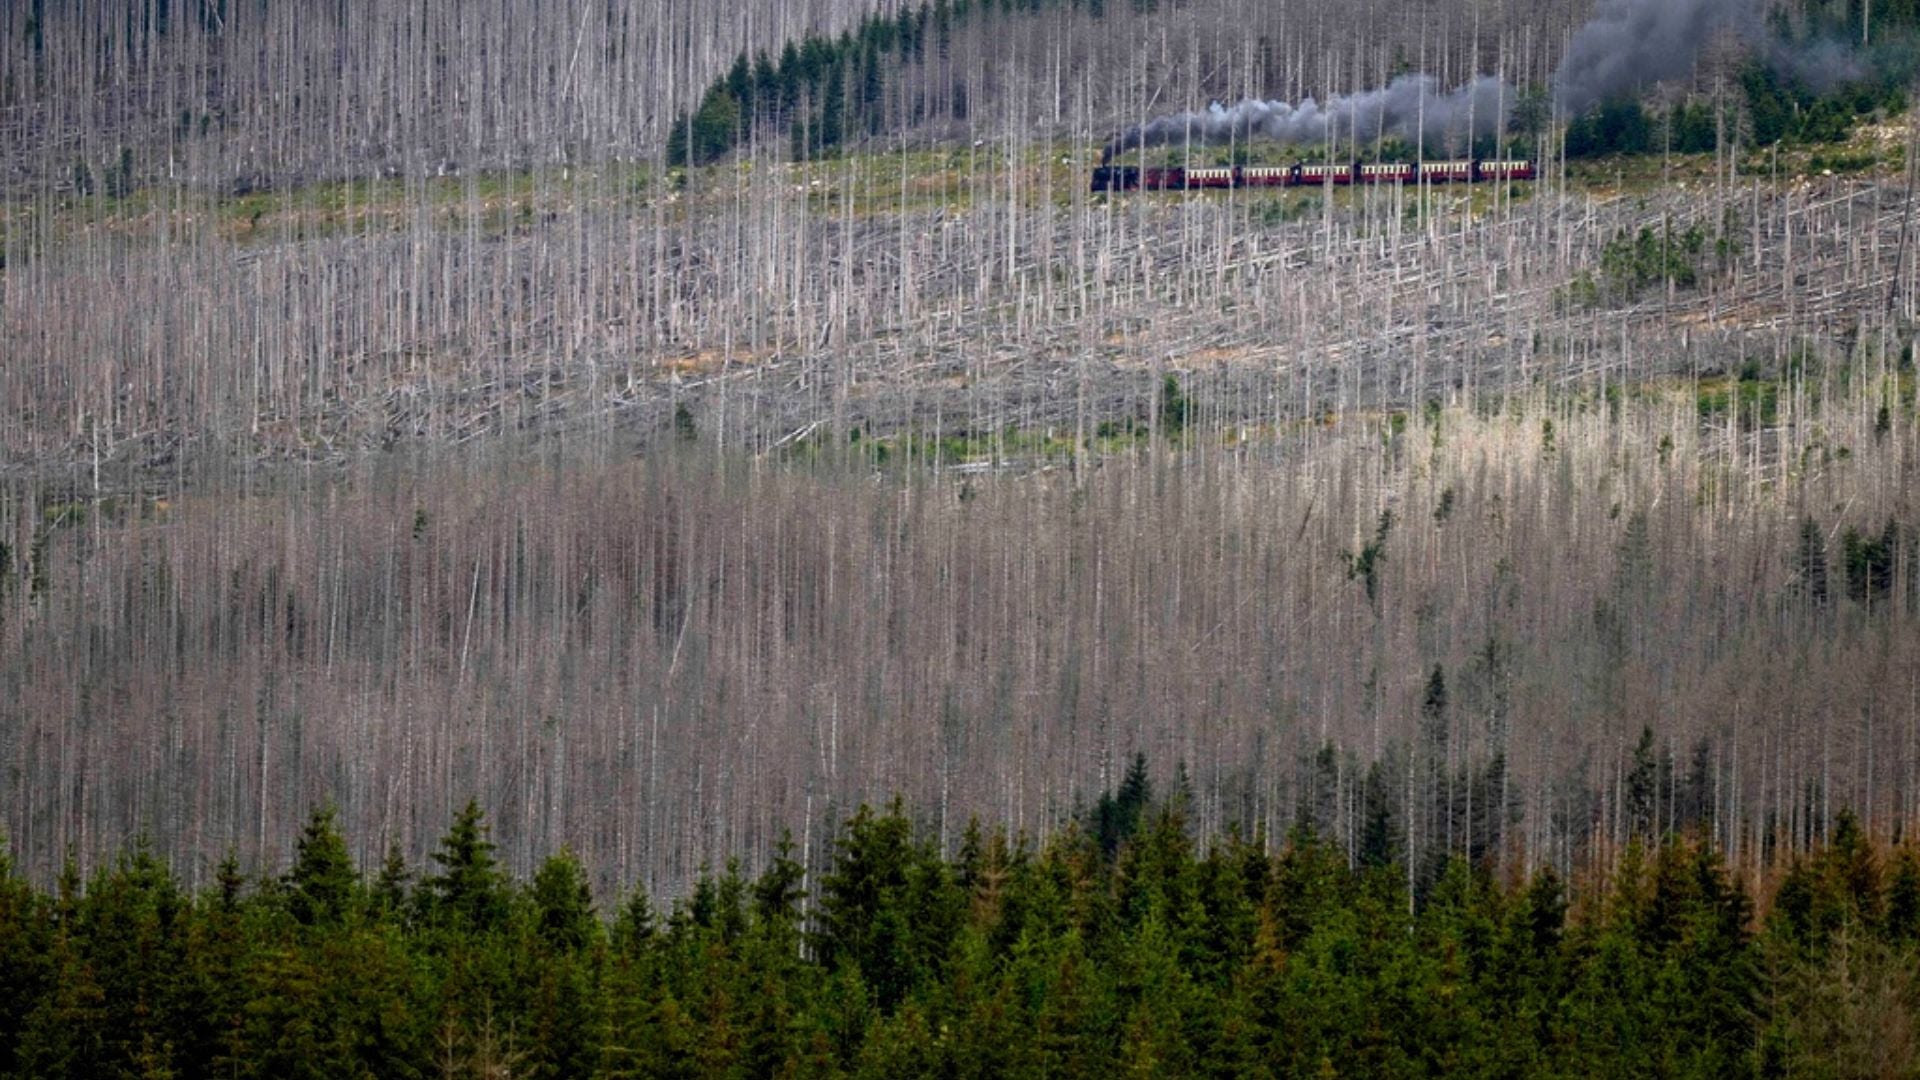 A train travels through a forest of barren trees.